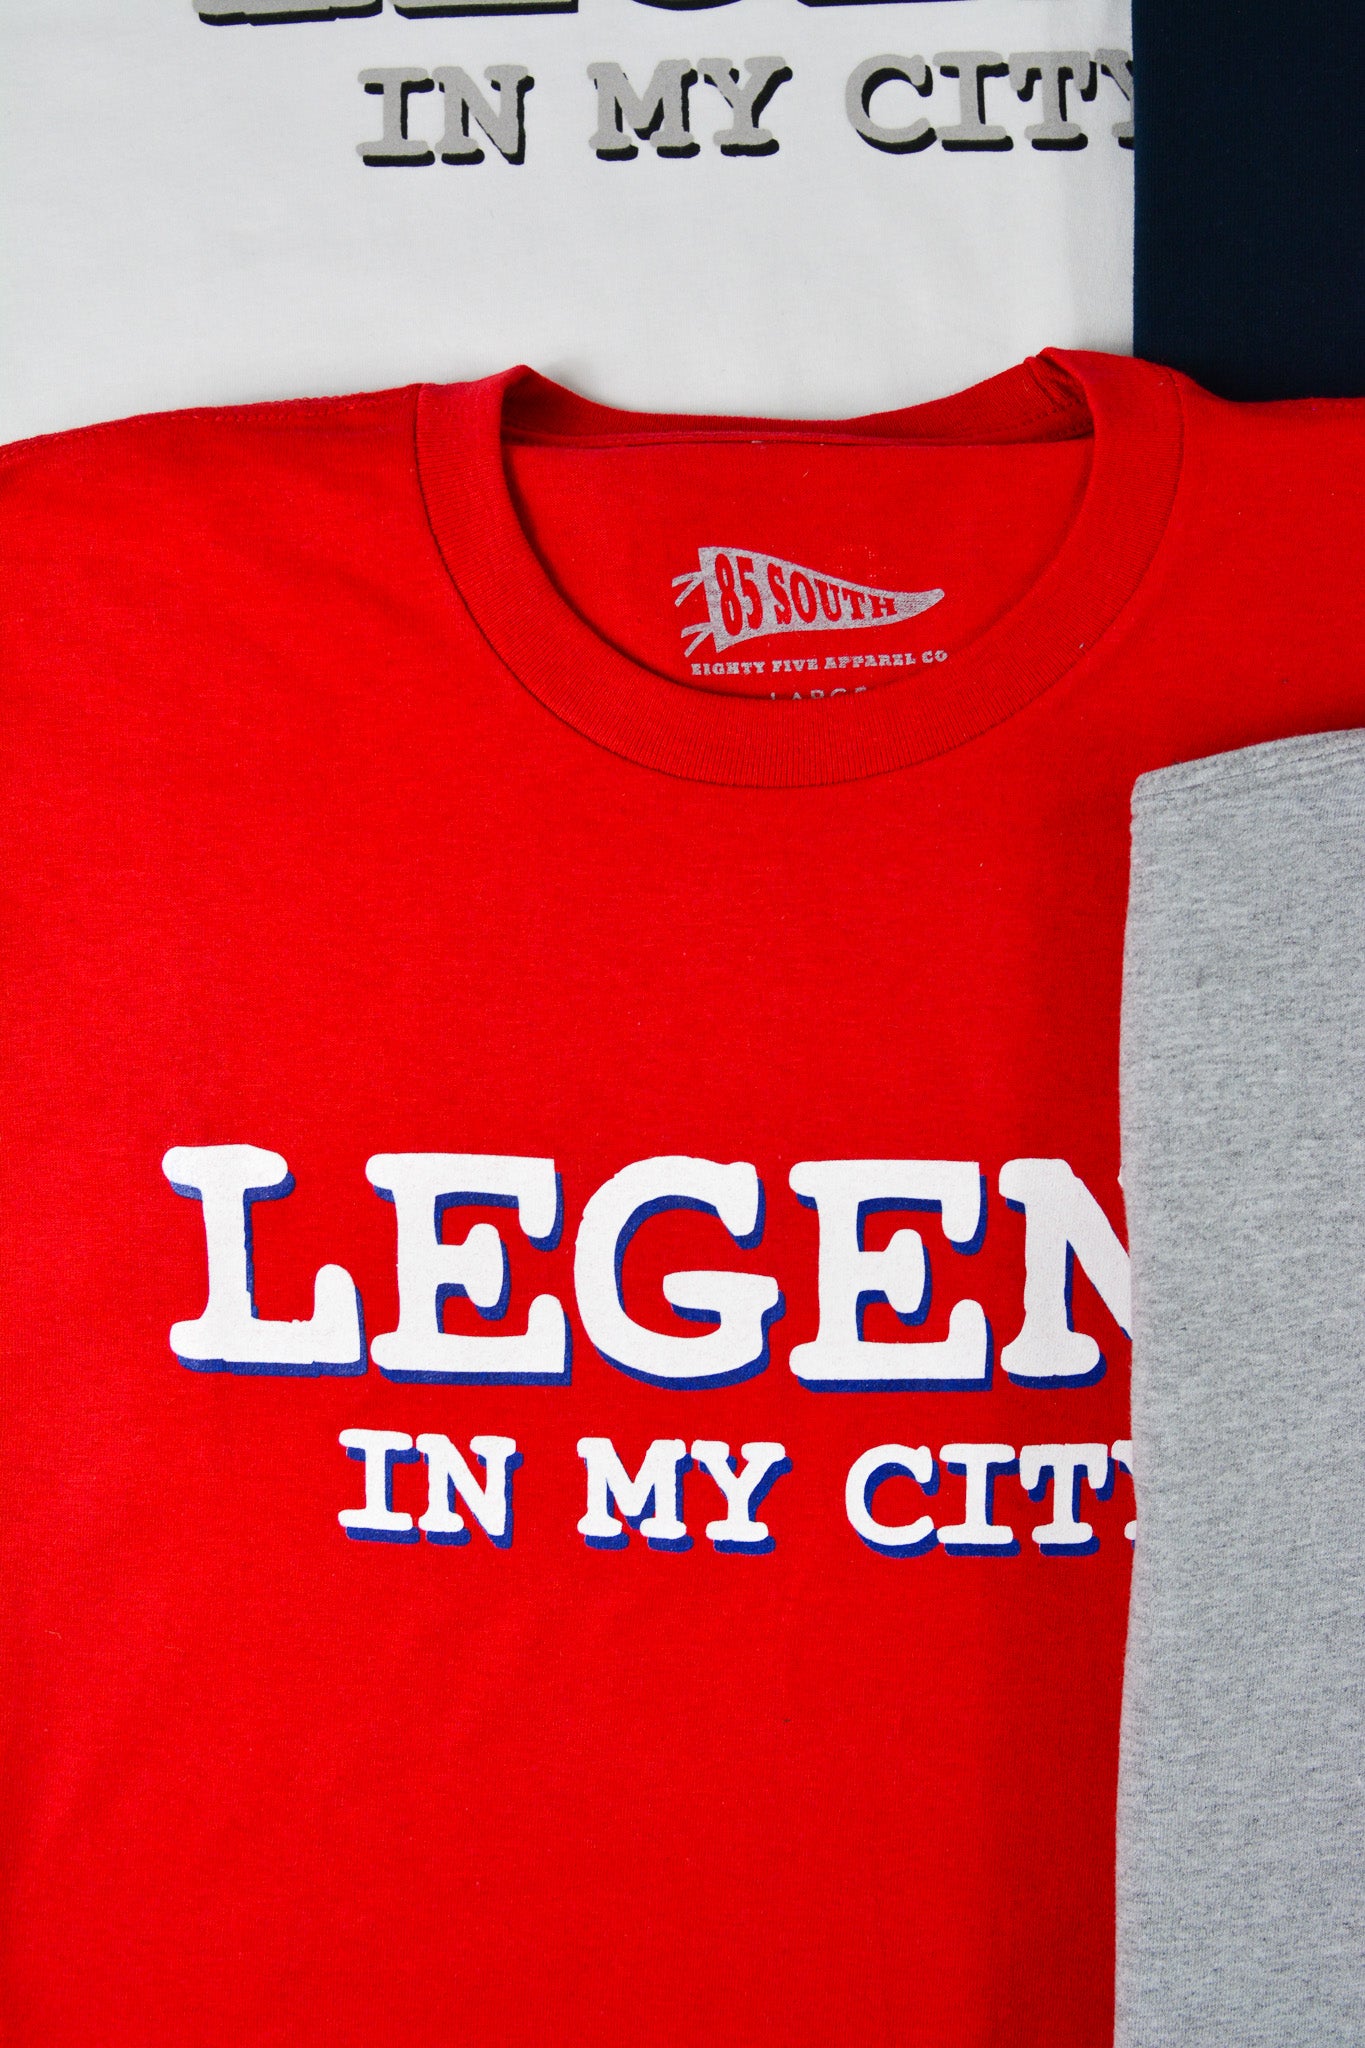 Legend In My City Short Sleeve Tee - Red